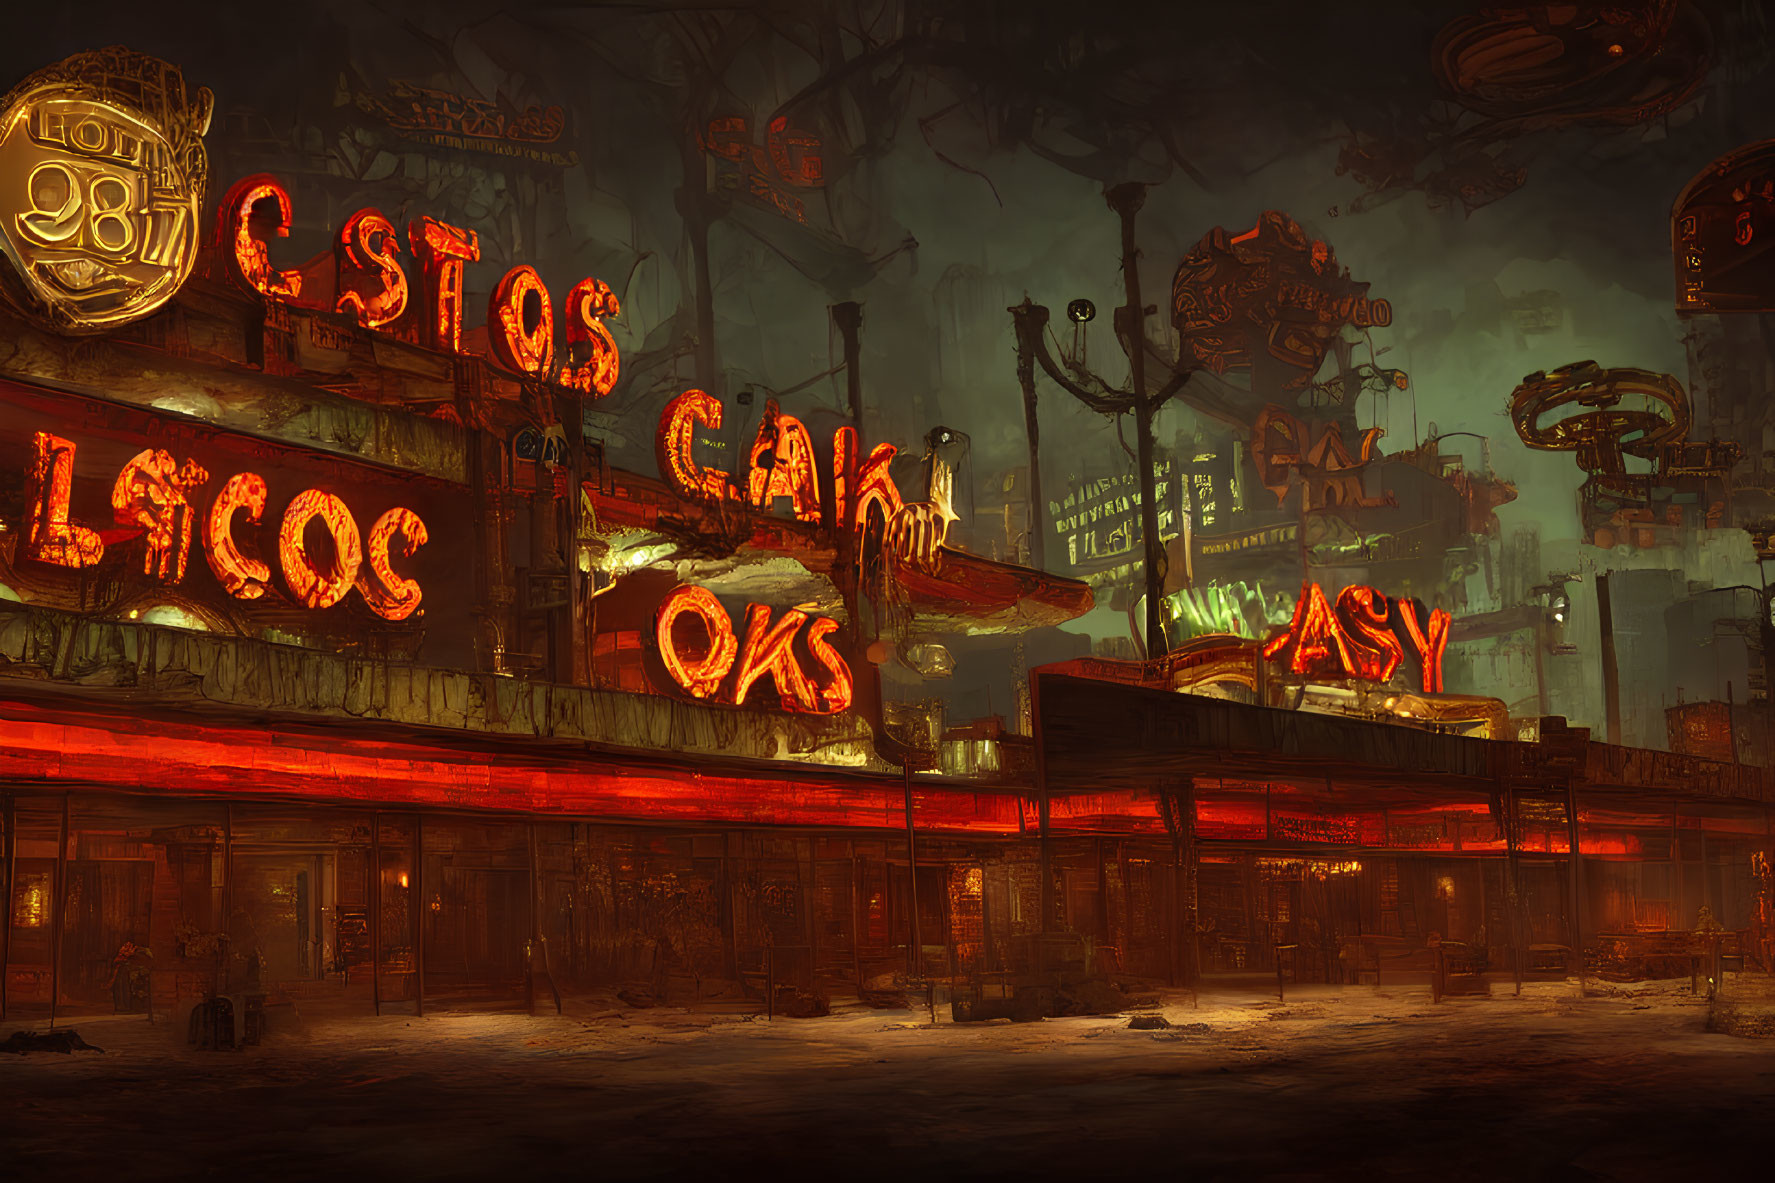 Gritty urban street scene at night with neon-lit signs like "Casino" and 